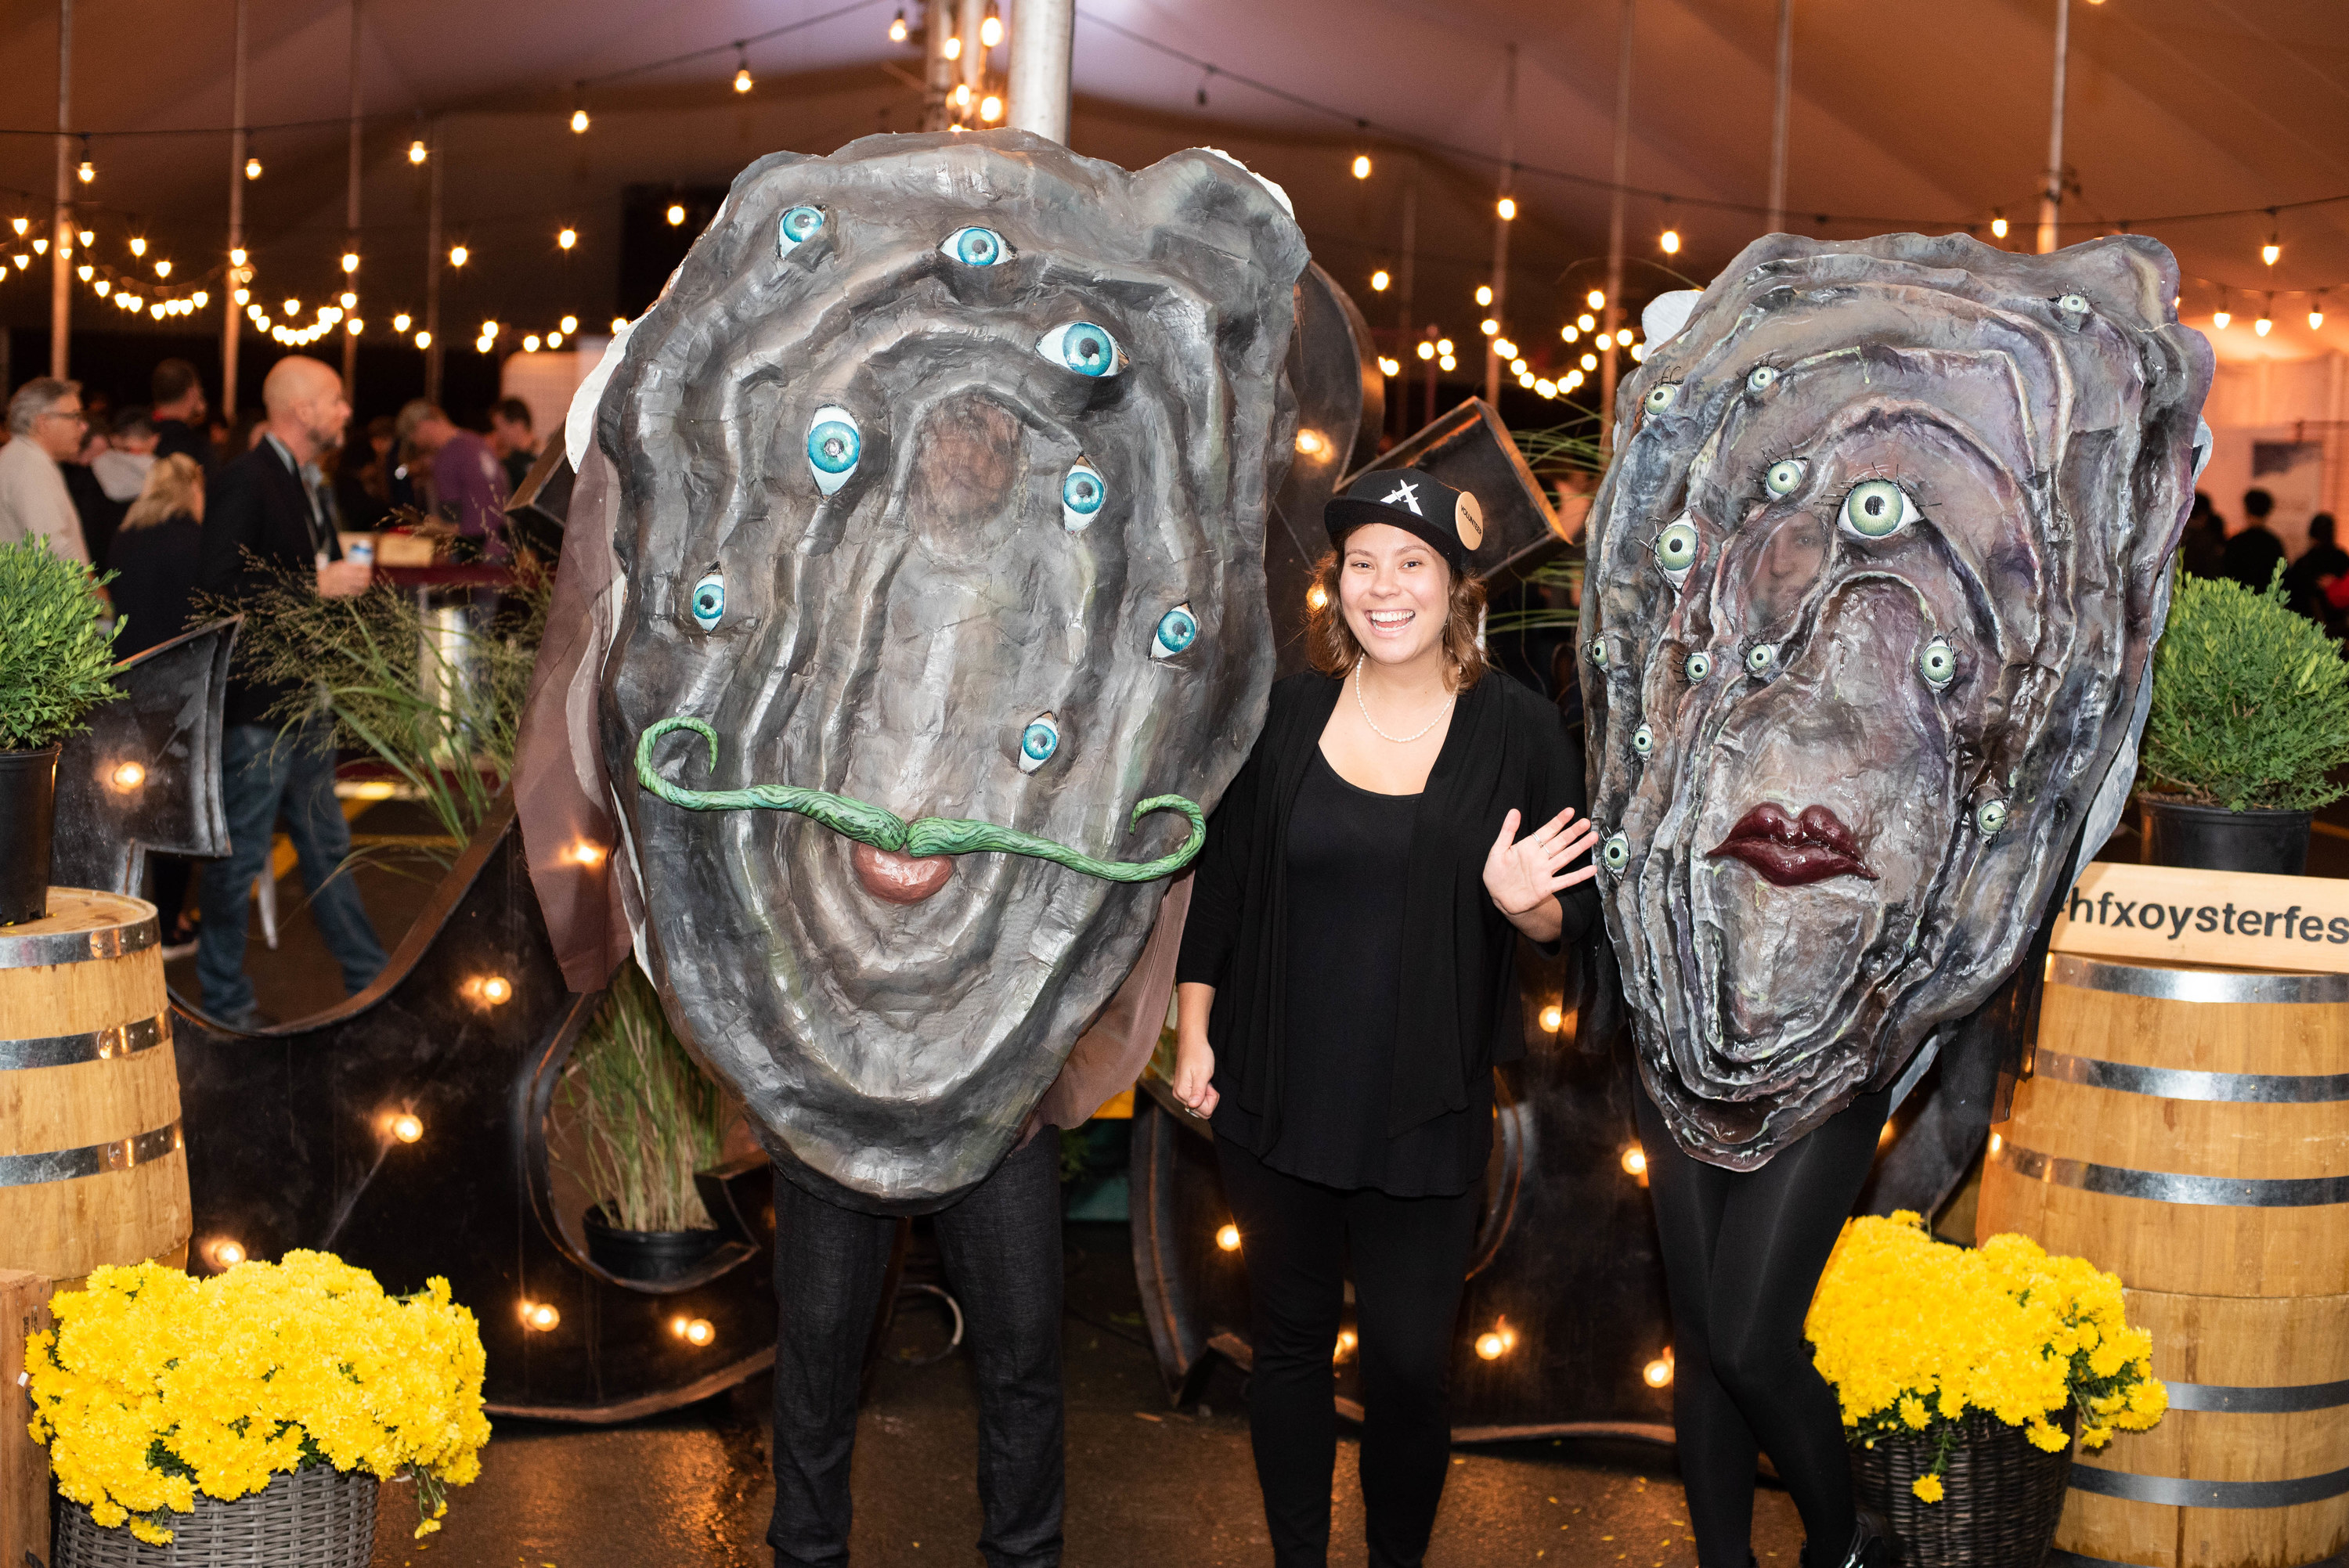 A woman waves hello standing between two oversize oyster costumes with a terrifying number of eyes and vacant expressions